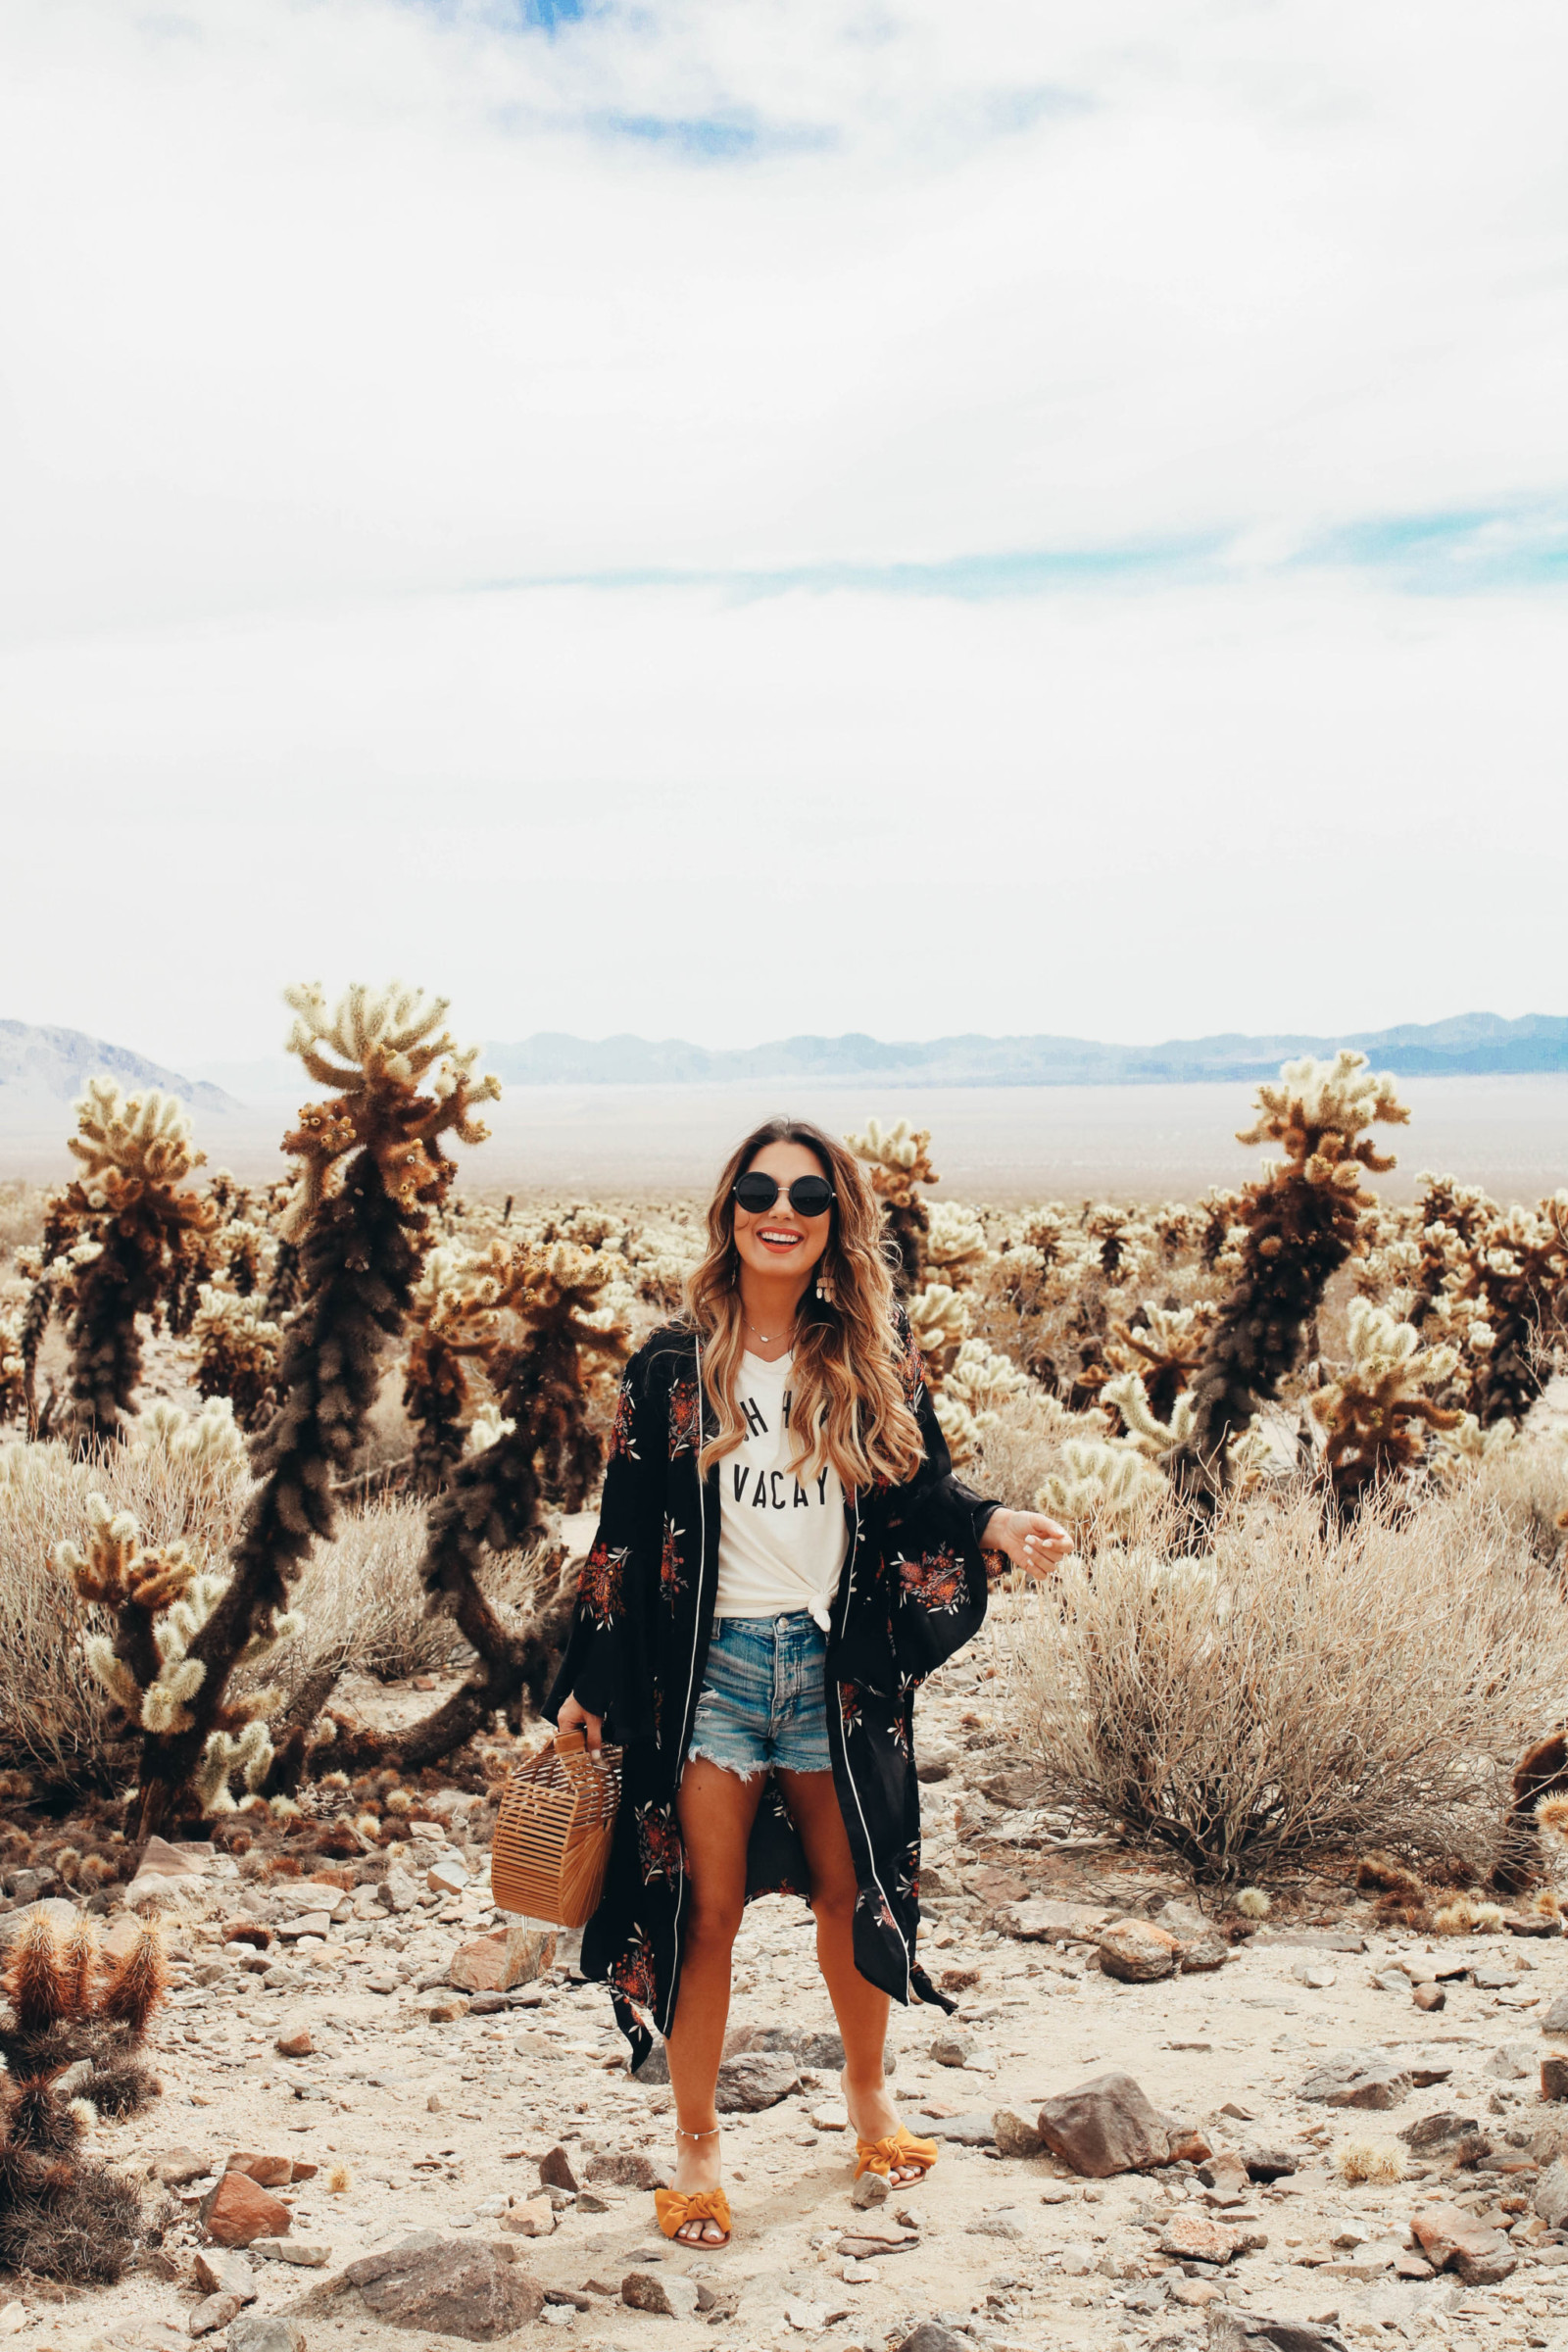 ALL OF THE MOST POPULAR PLACES THAT YOU MUST SEE IN PALM SPRINGS. ALL OF MY FAVORITE INSTAGRAM WORTHY SPOTS IN PALM SPRINGS IS IN THE BLOG. READ MORE TO FIND OUT MY EXACT THOUGHTS.